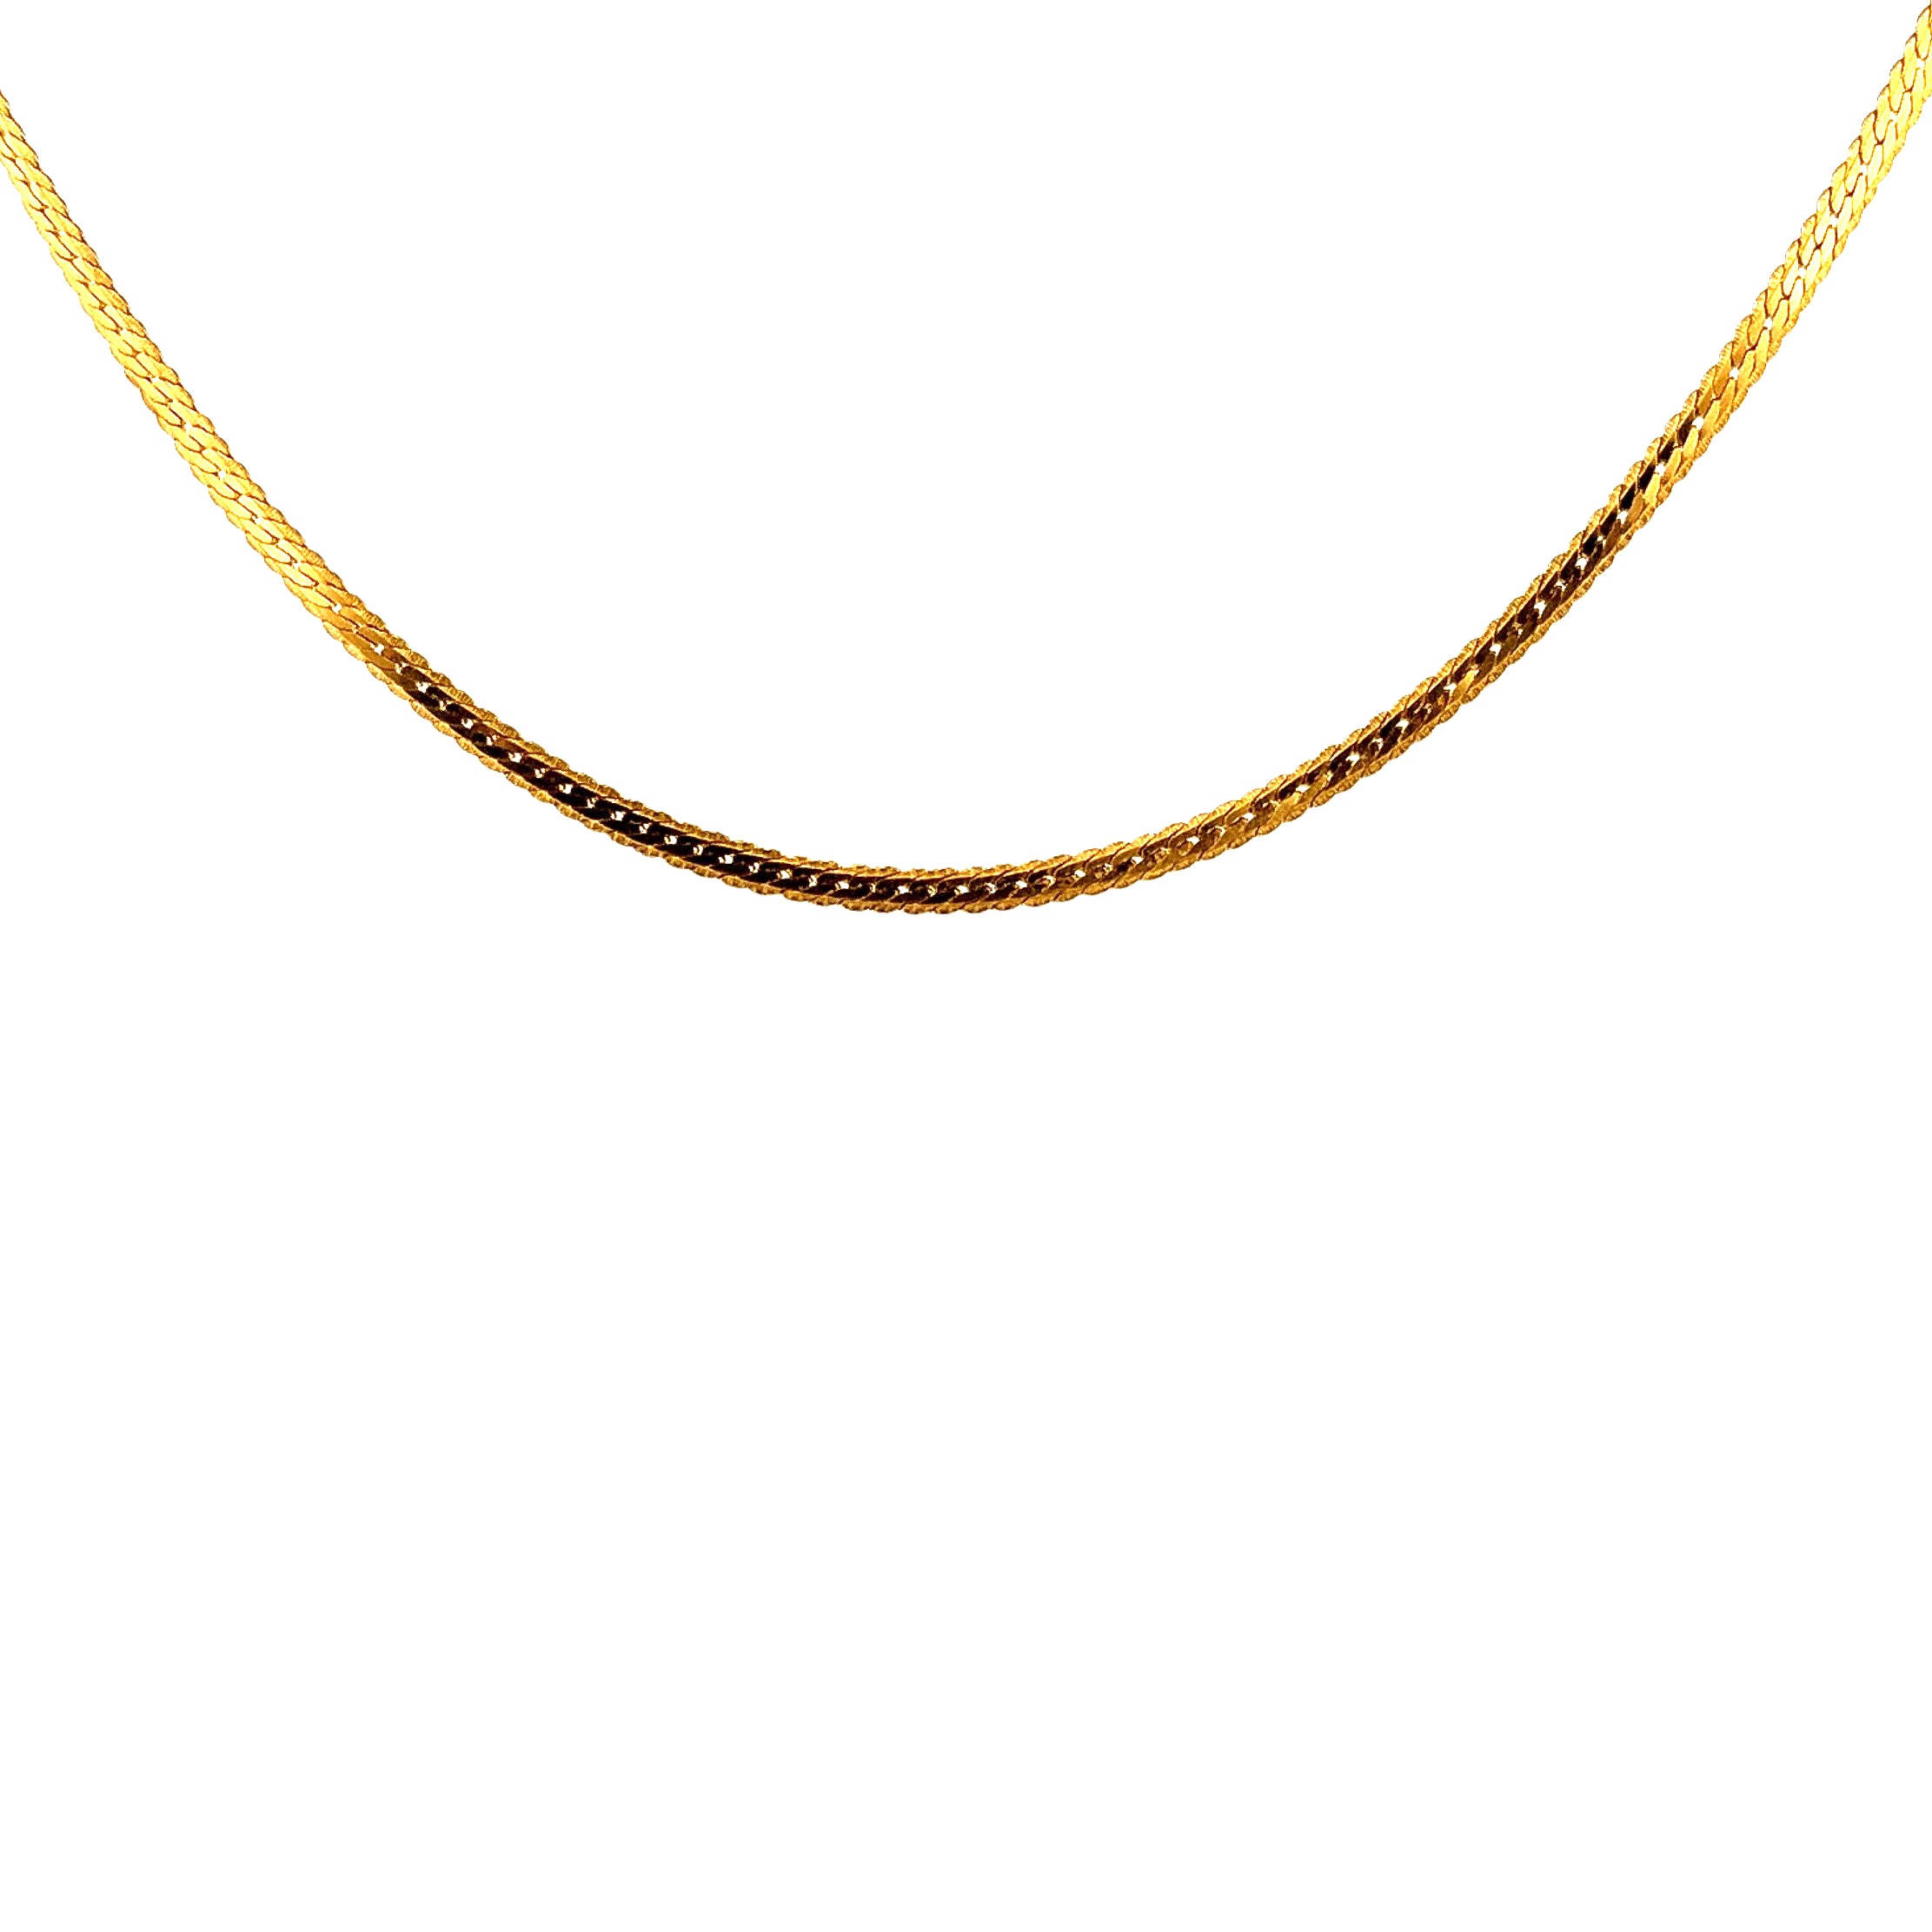 22ct yellow gold necklace